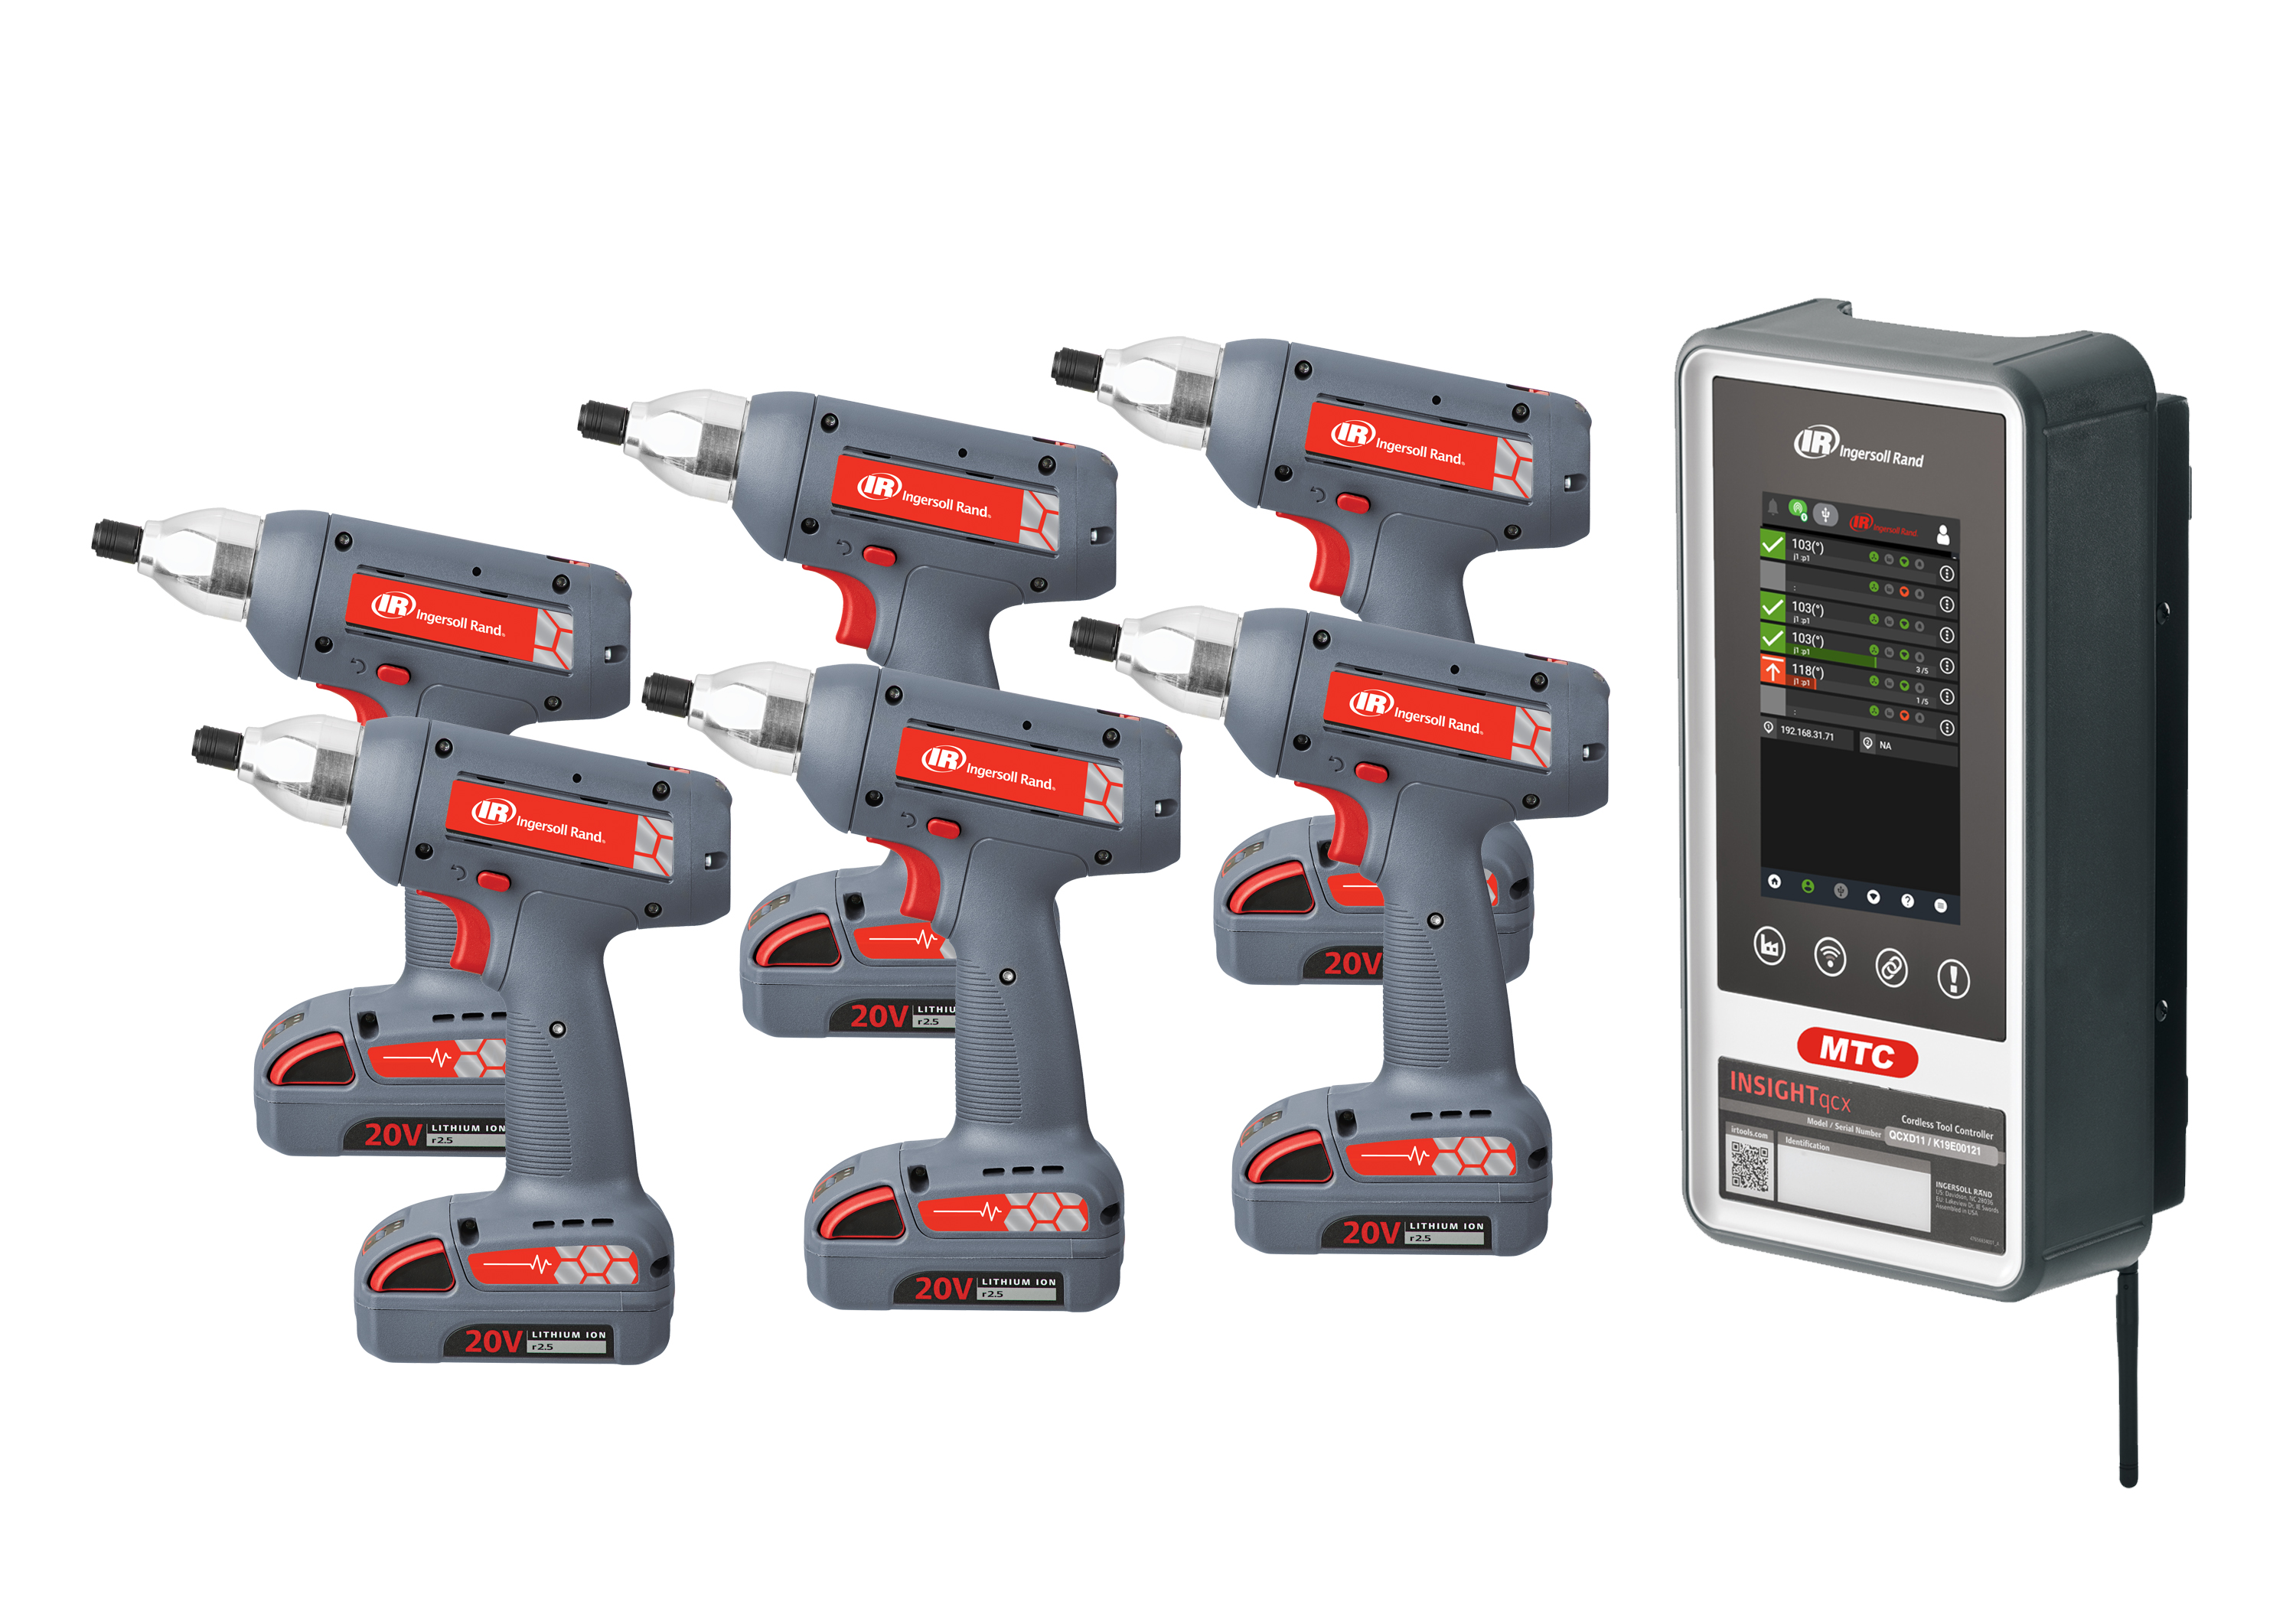 INSIGHTqcx Multi-Tool Controller controls up to 6 tools